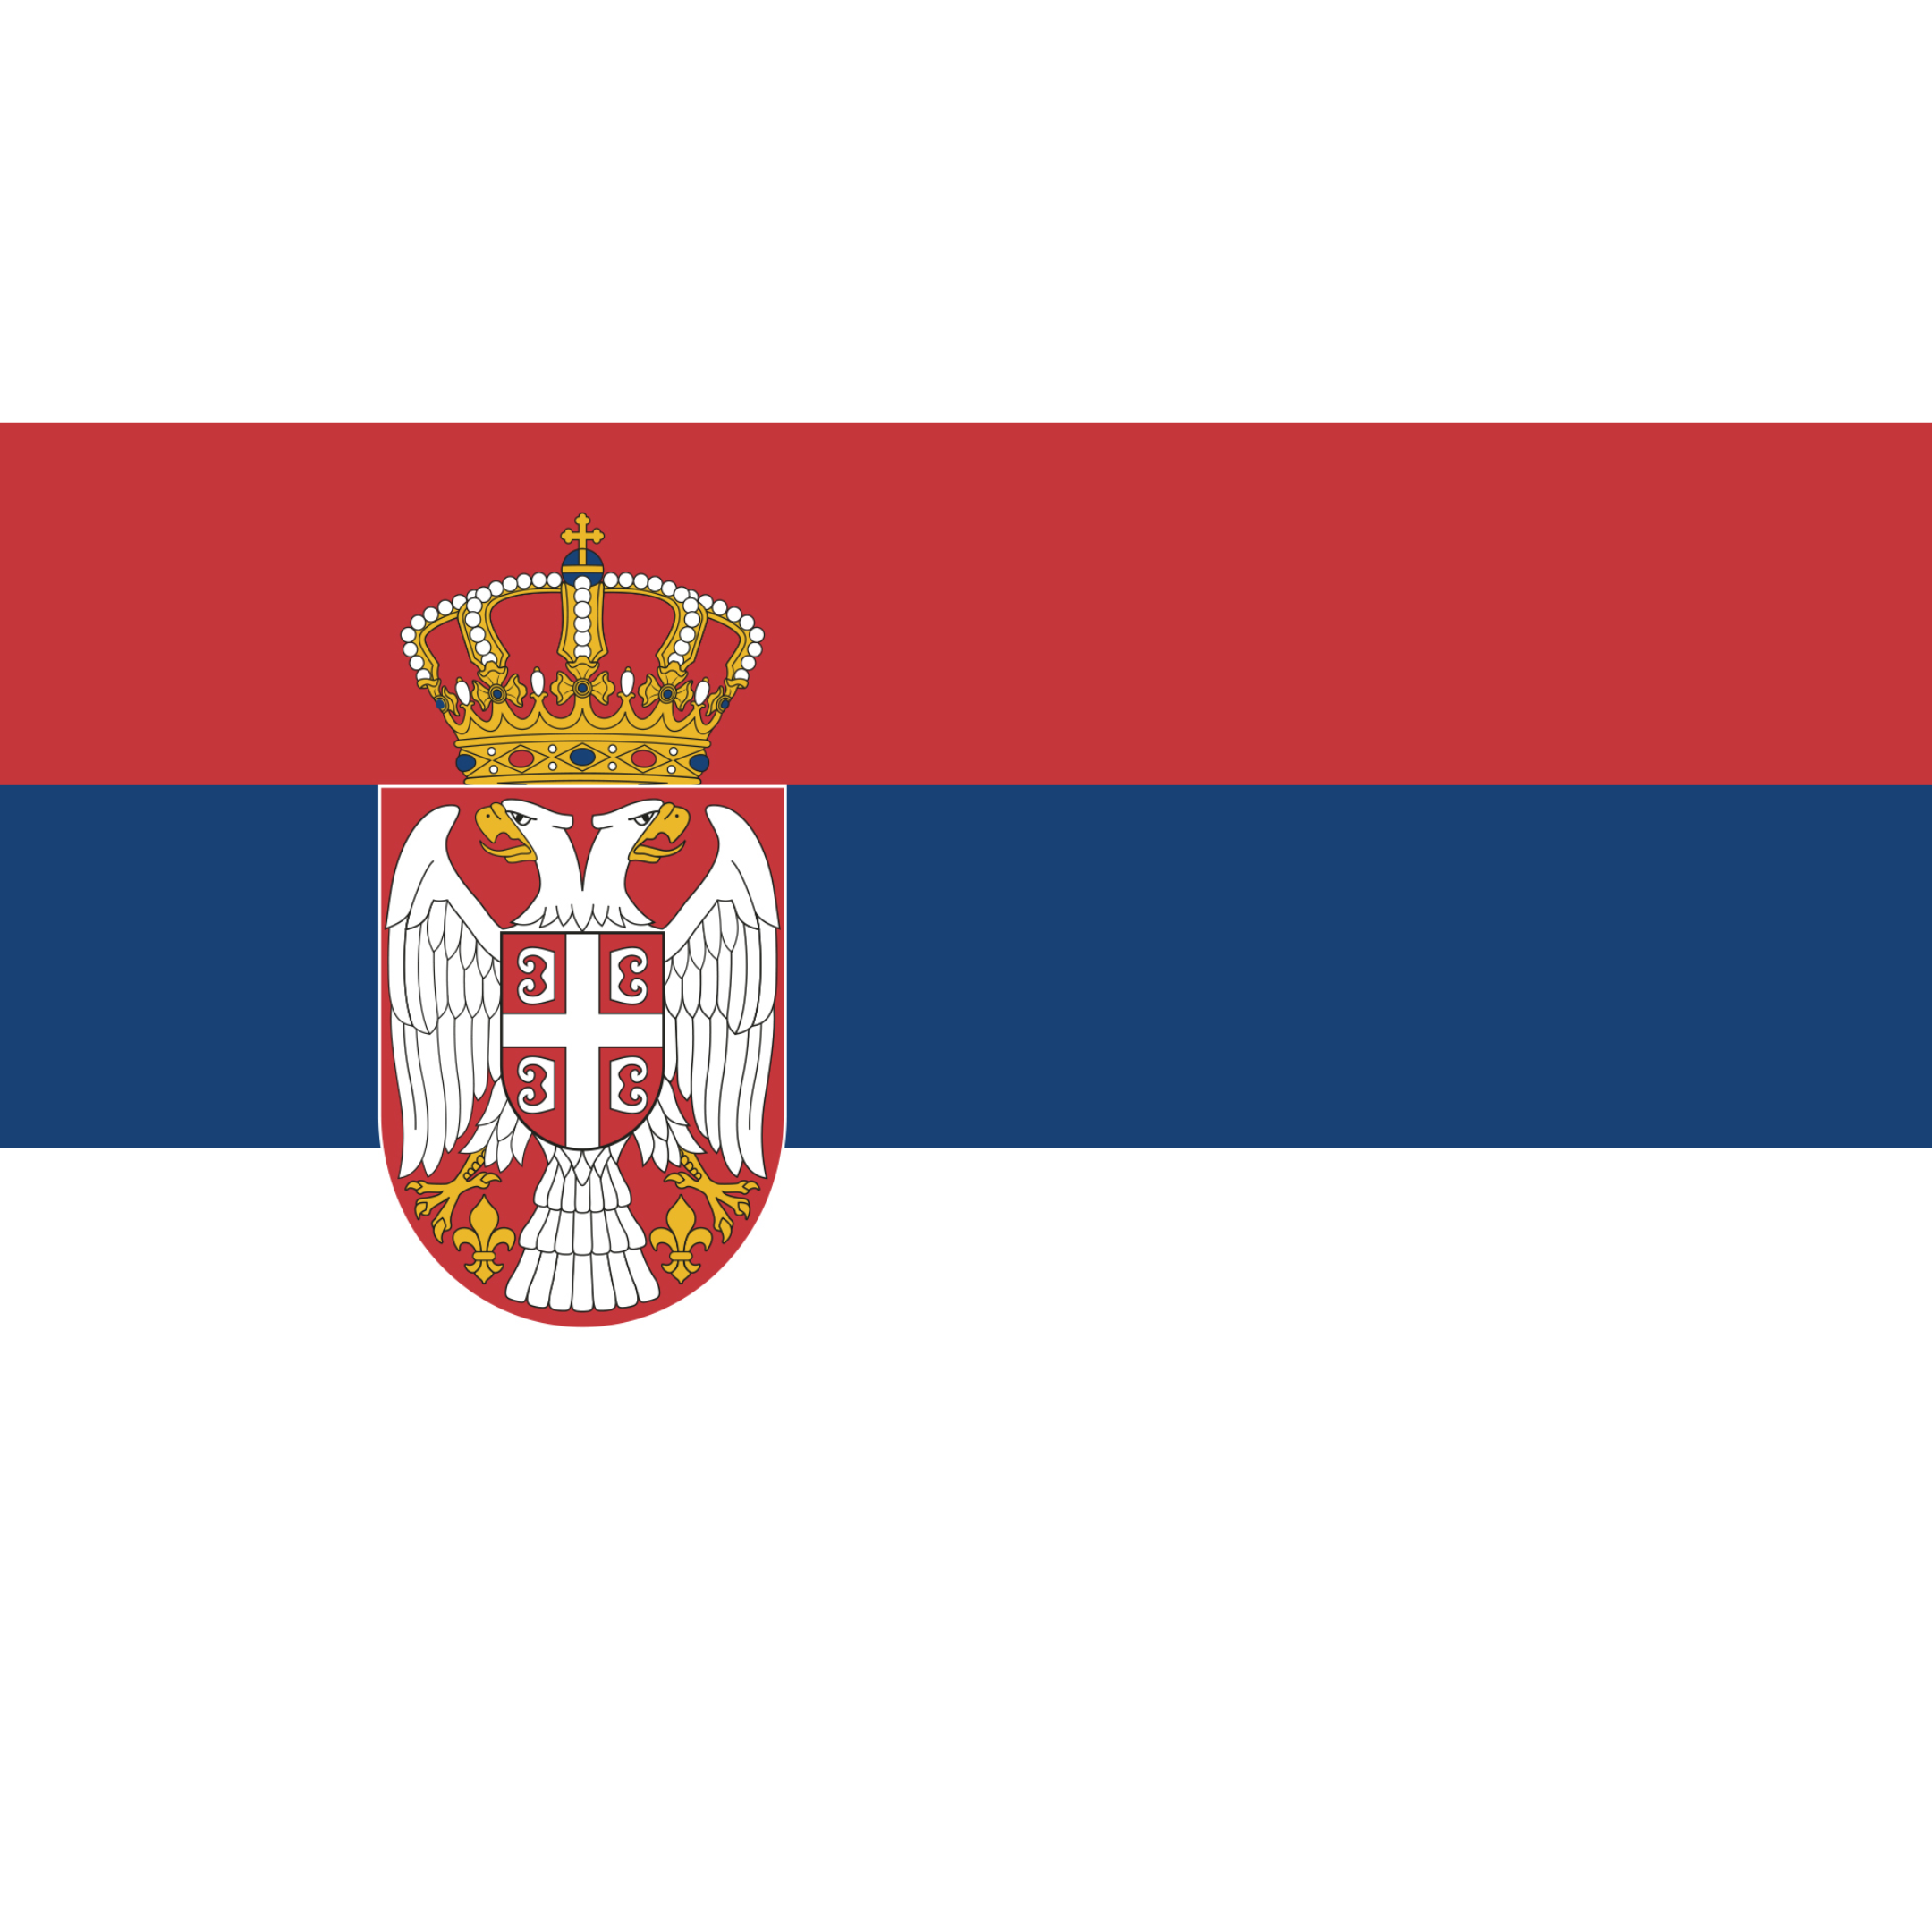 The Serbian flag has equal horizontal bands in red, blue and white (from top to bottom) with a coat of arms off centre left.